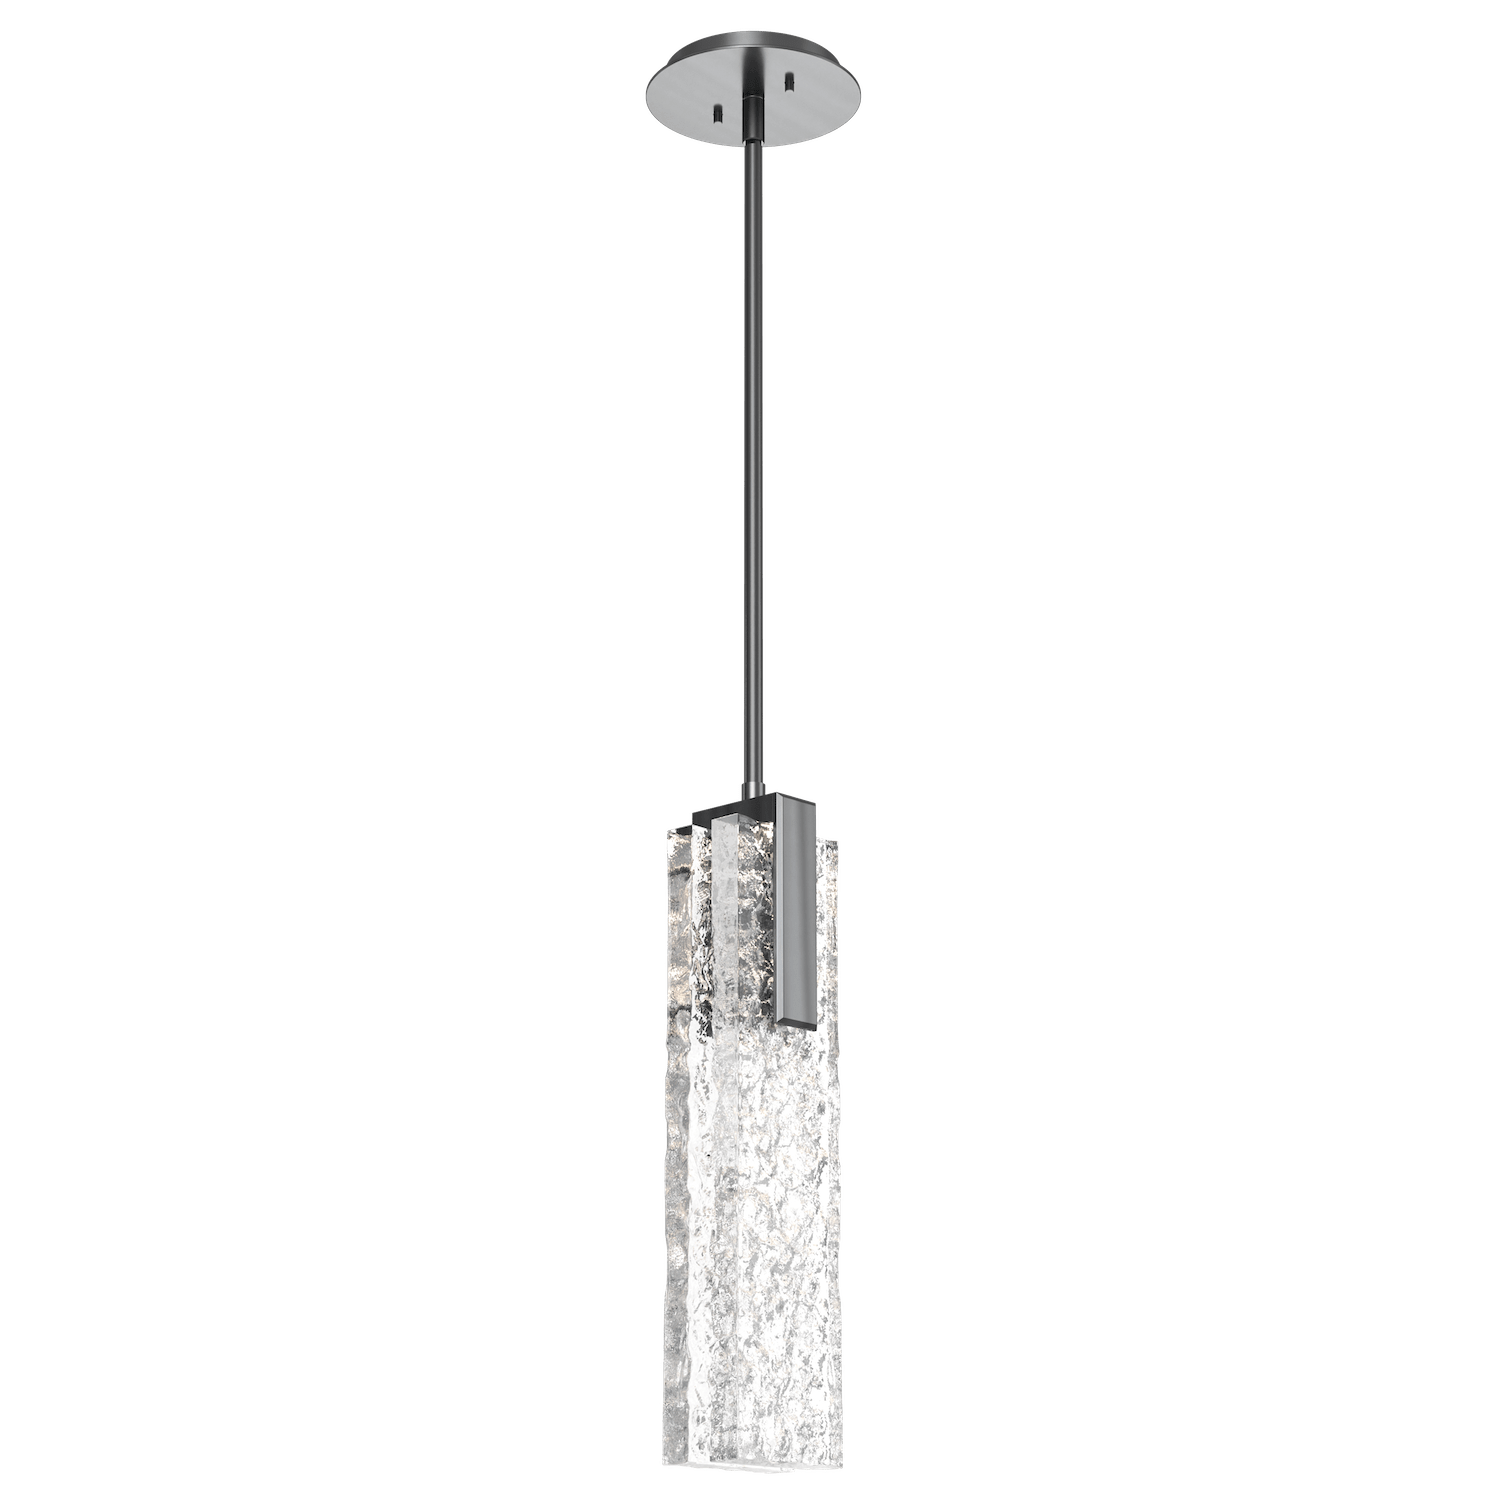 LAB0061-17-GM-GC-Hammerton-Studio-Glacier-pendant-light-with-gunmetal-finish-and-clear-blown-glass-with-geo-clear-cast-glass-diffusers-and-LED-lamping